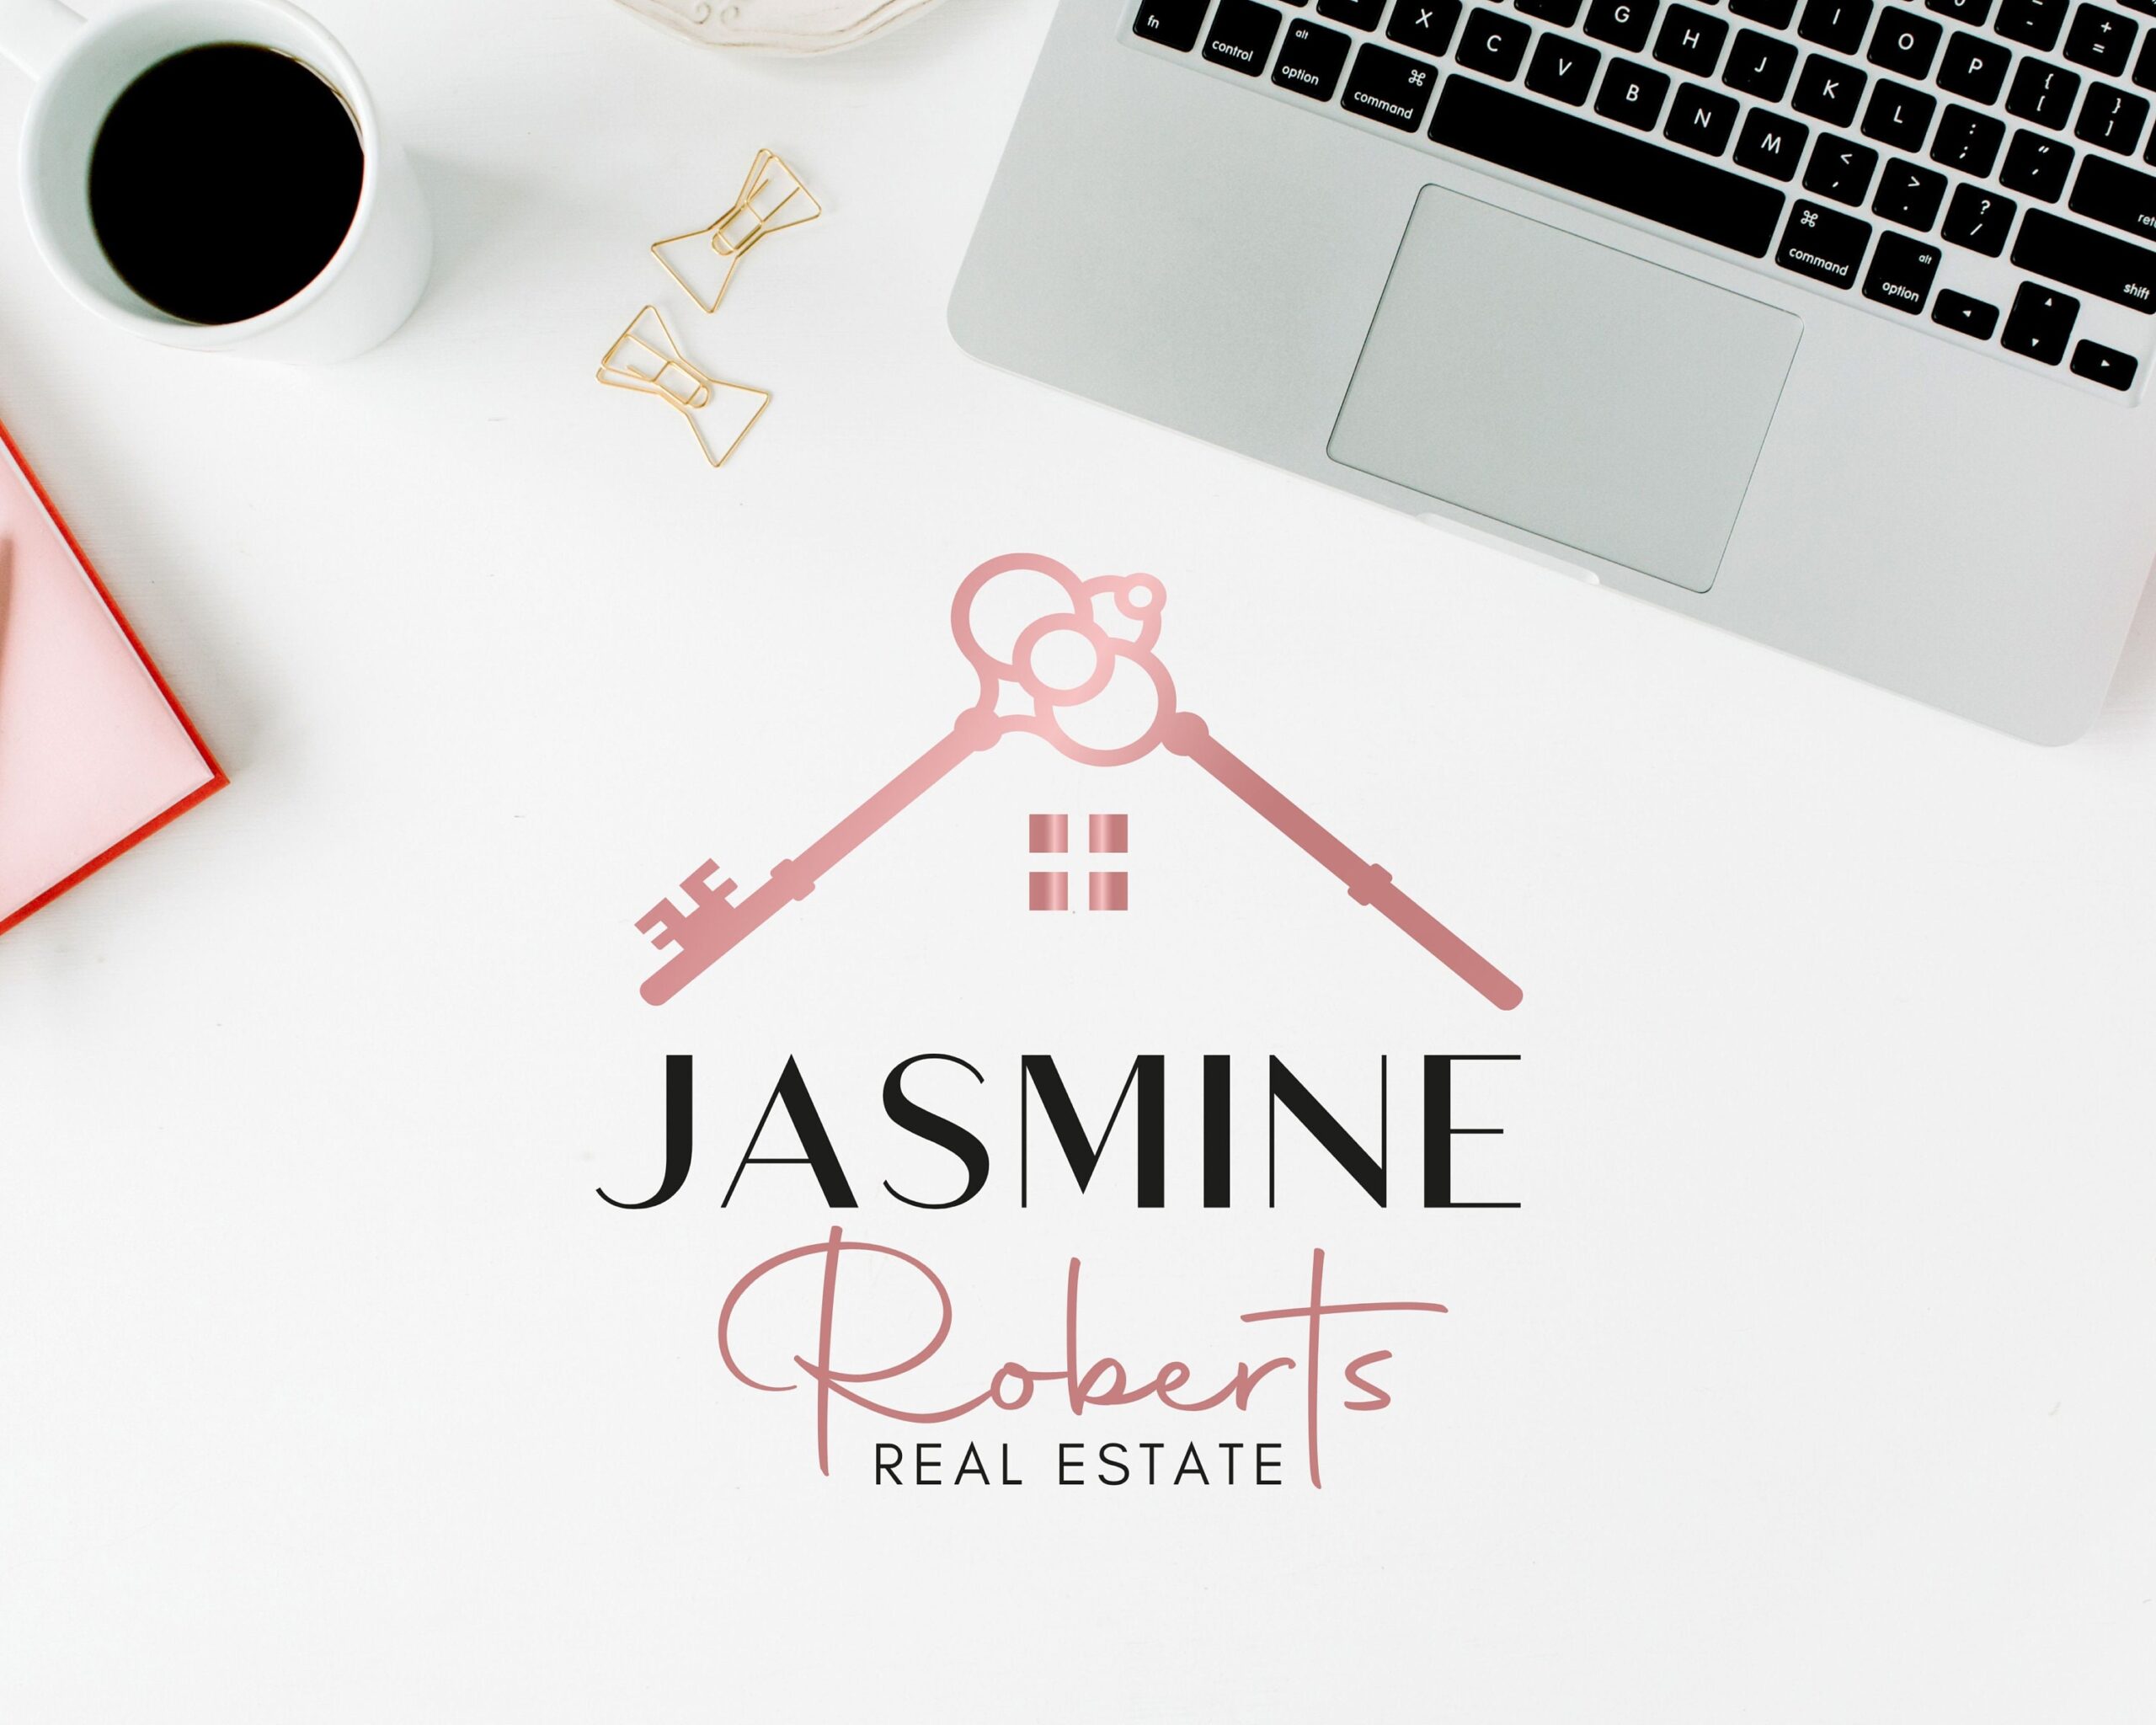 Real Estate Rose Gold Premade Logo Design -  Full Set: Logo + Sublogo + Watermarks all included - High-Quality Branding for Real Estate Agents